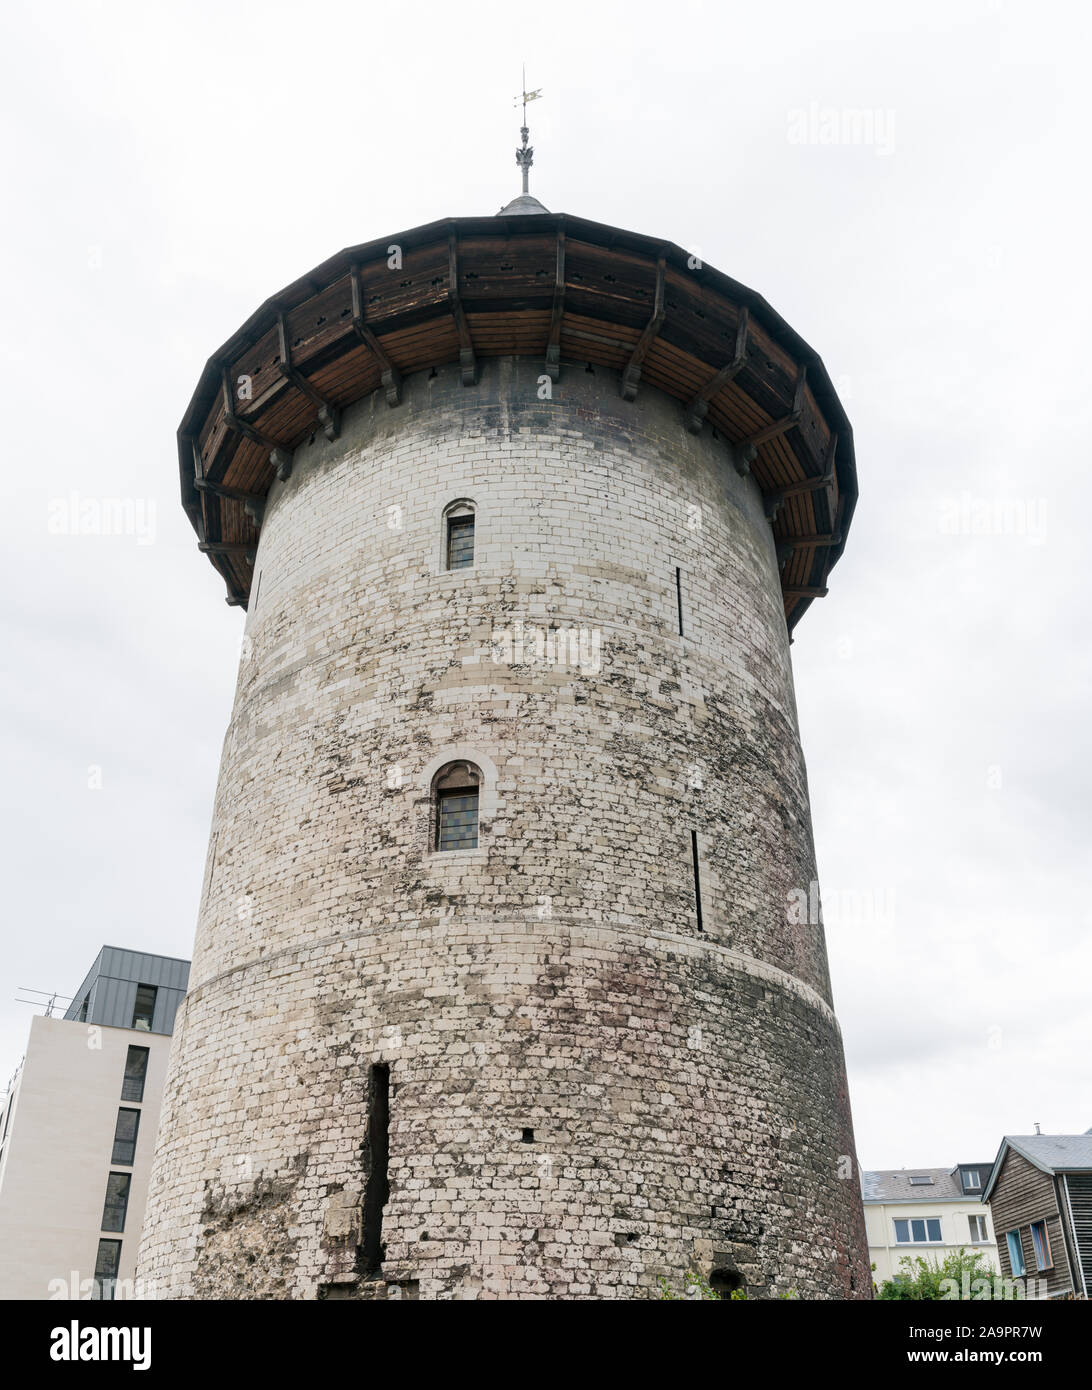 Rouen, Seine-Maritime / France - 12 August 2019: view of the Joan of Arc tower in Rouen in Normandy Stock Photo